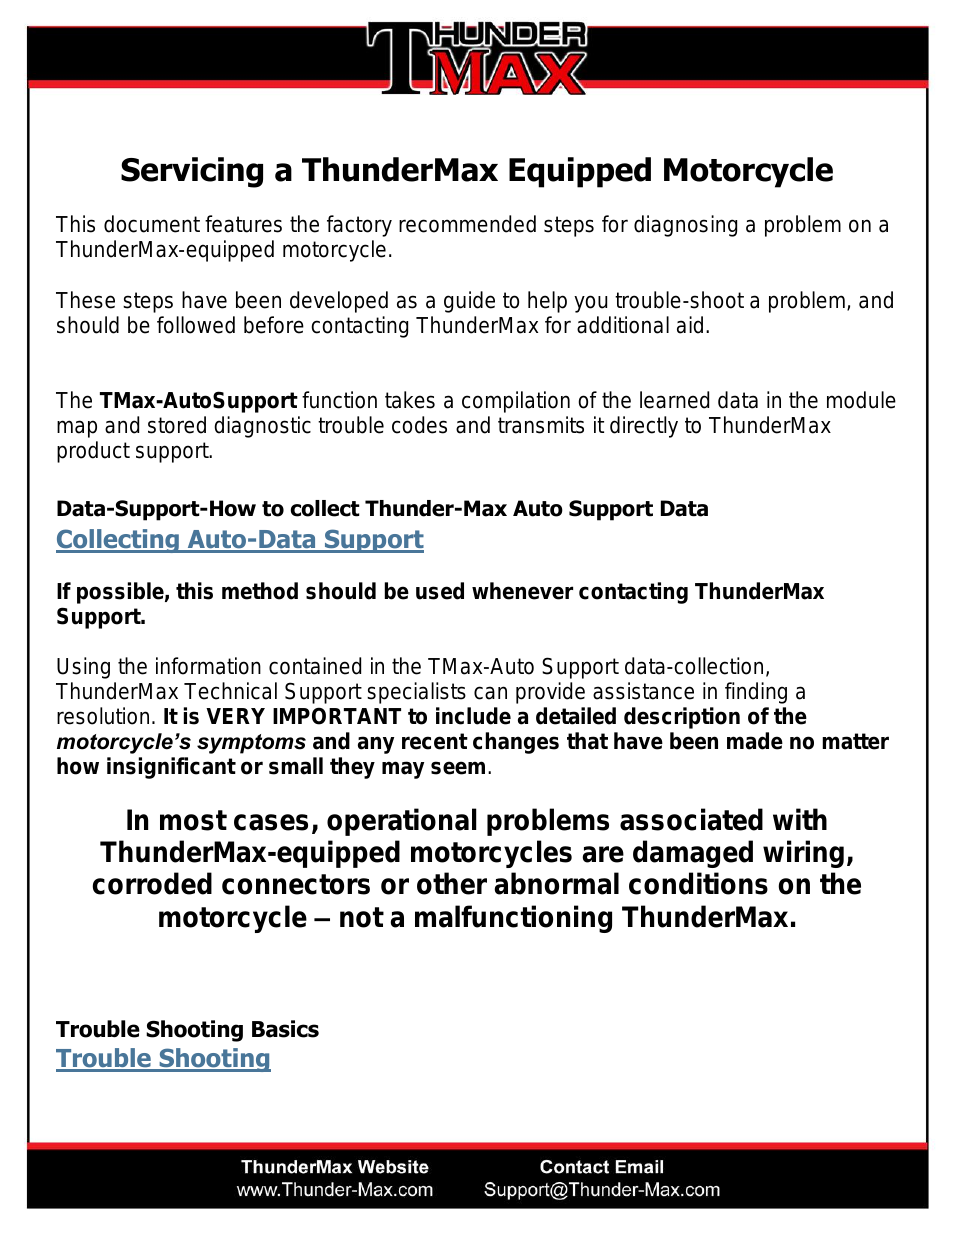 Servicing ThunderMax Equipped Bikes